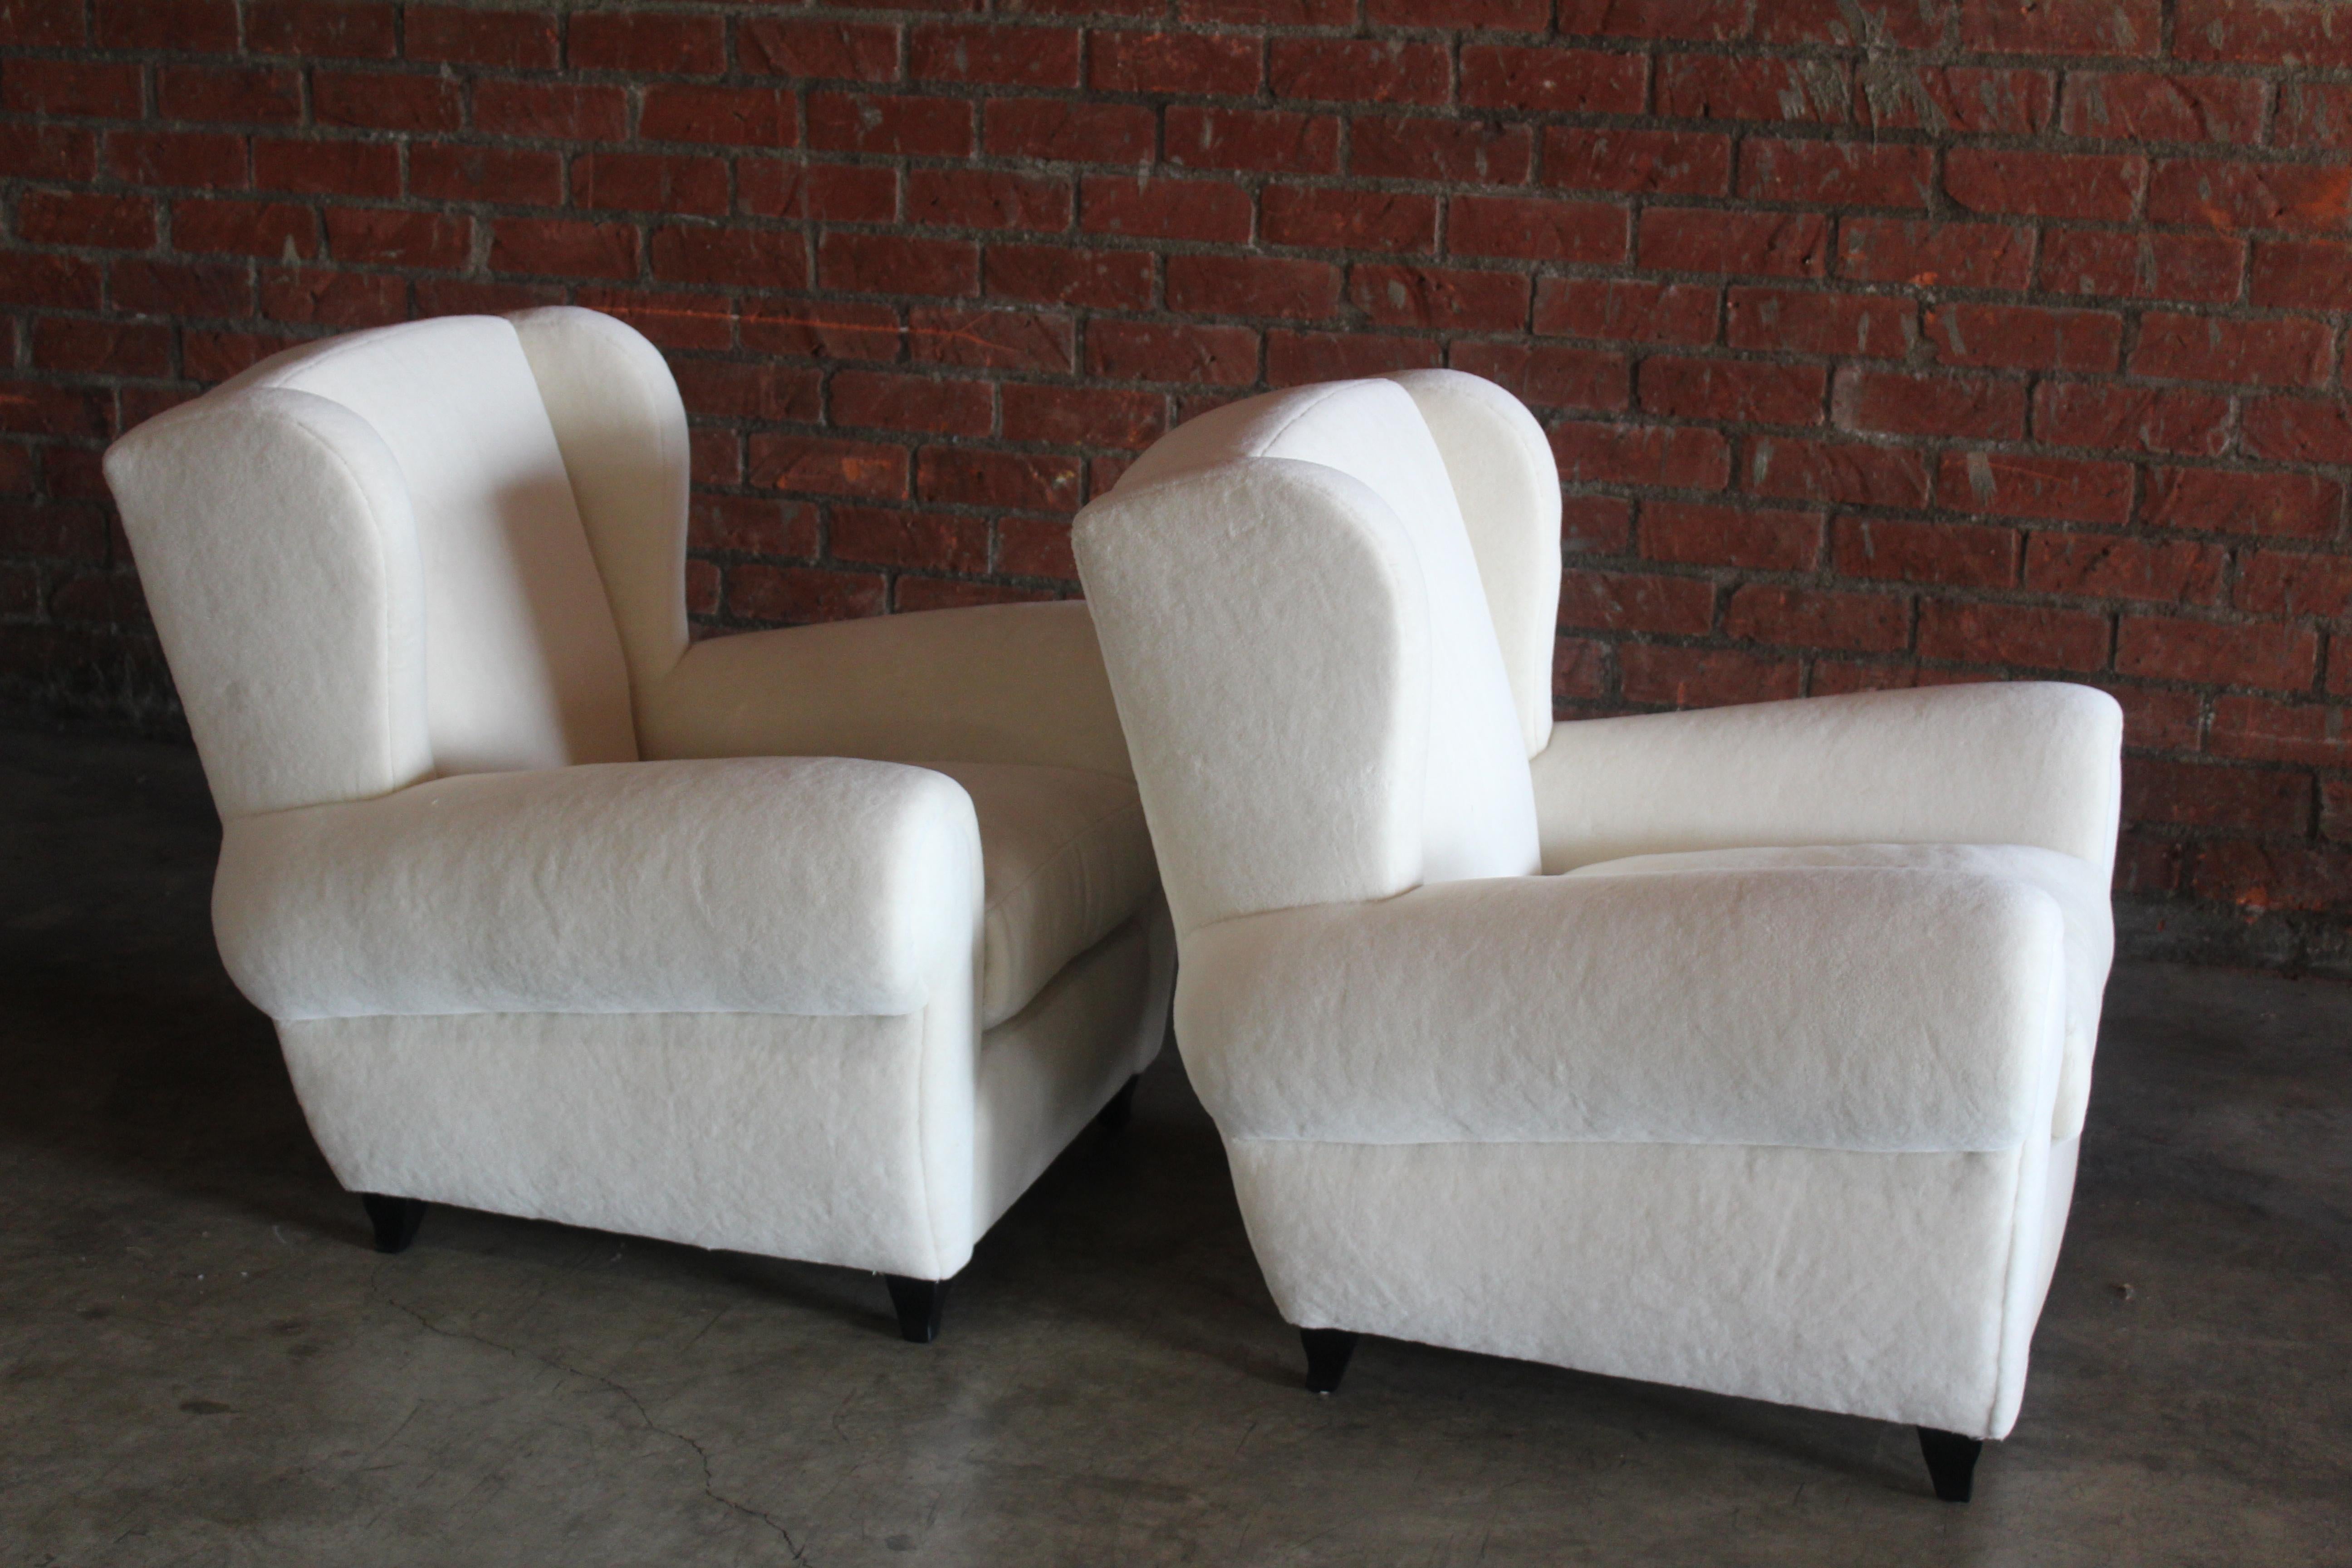 Pair of 1930s Maurice Rinck Style Art Deco French Club Chairs in Alpaca Wool For Sale 8